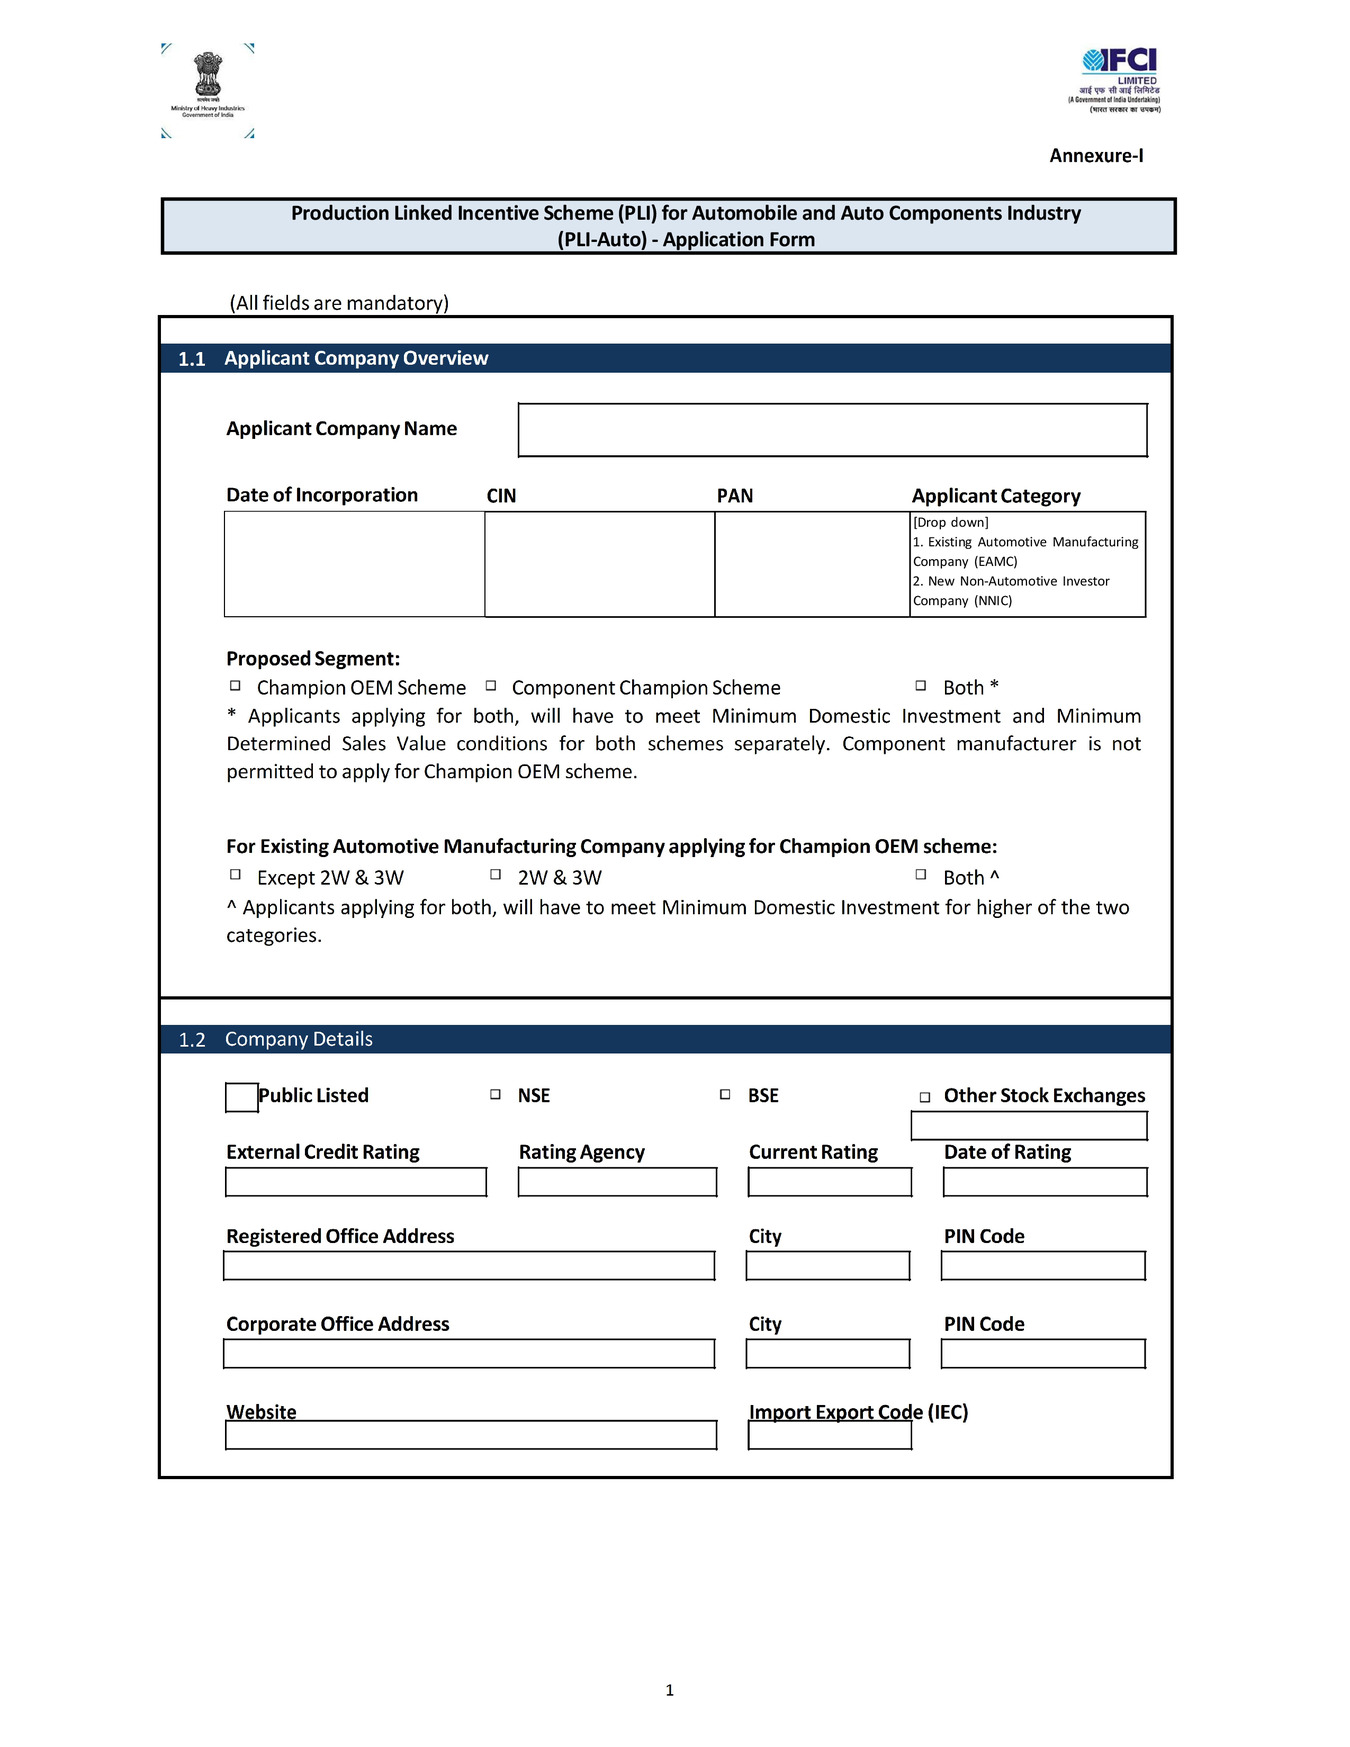 PLI Scheme for Automobile and Auto Component Industry Application Form 2022 PDF